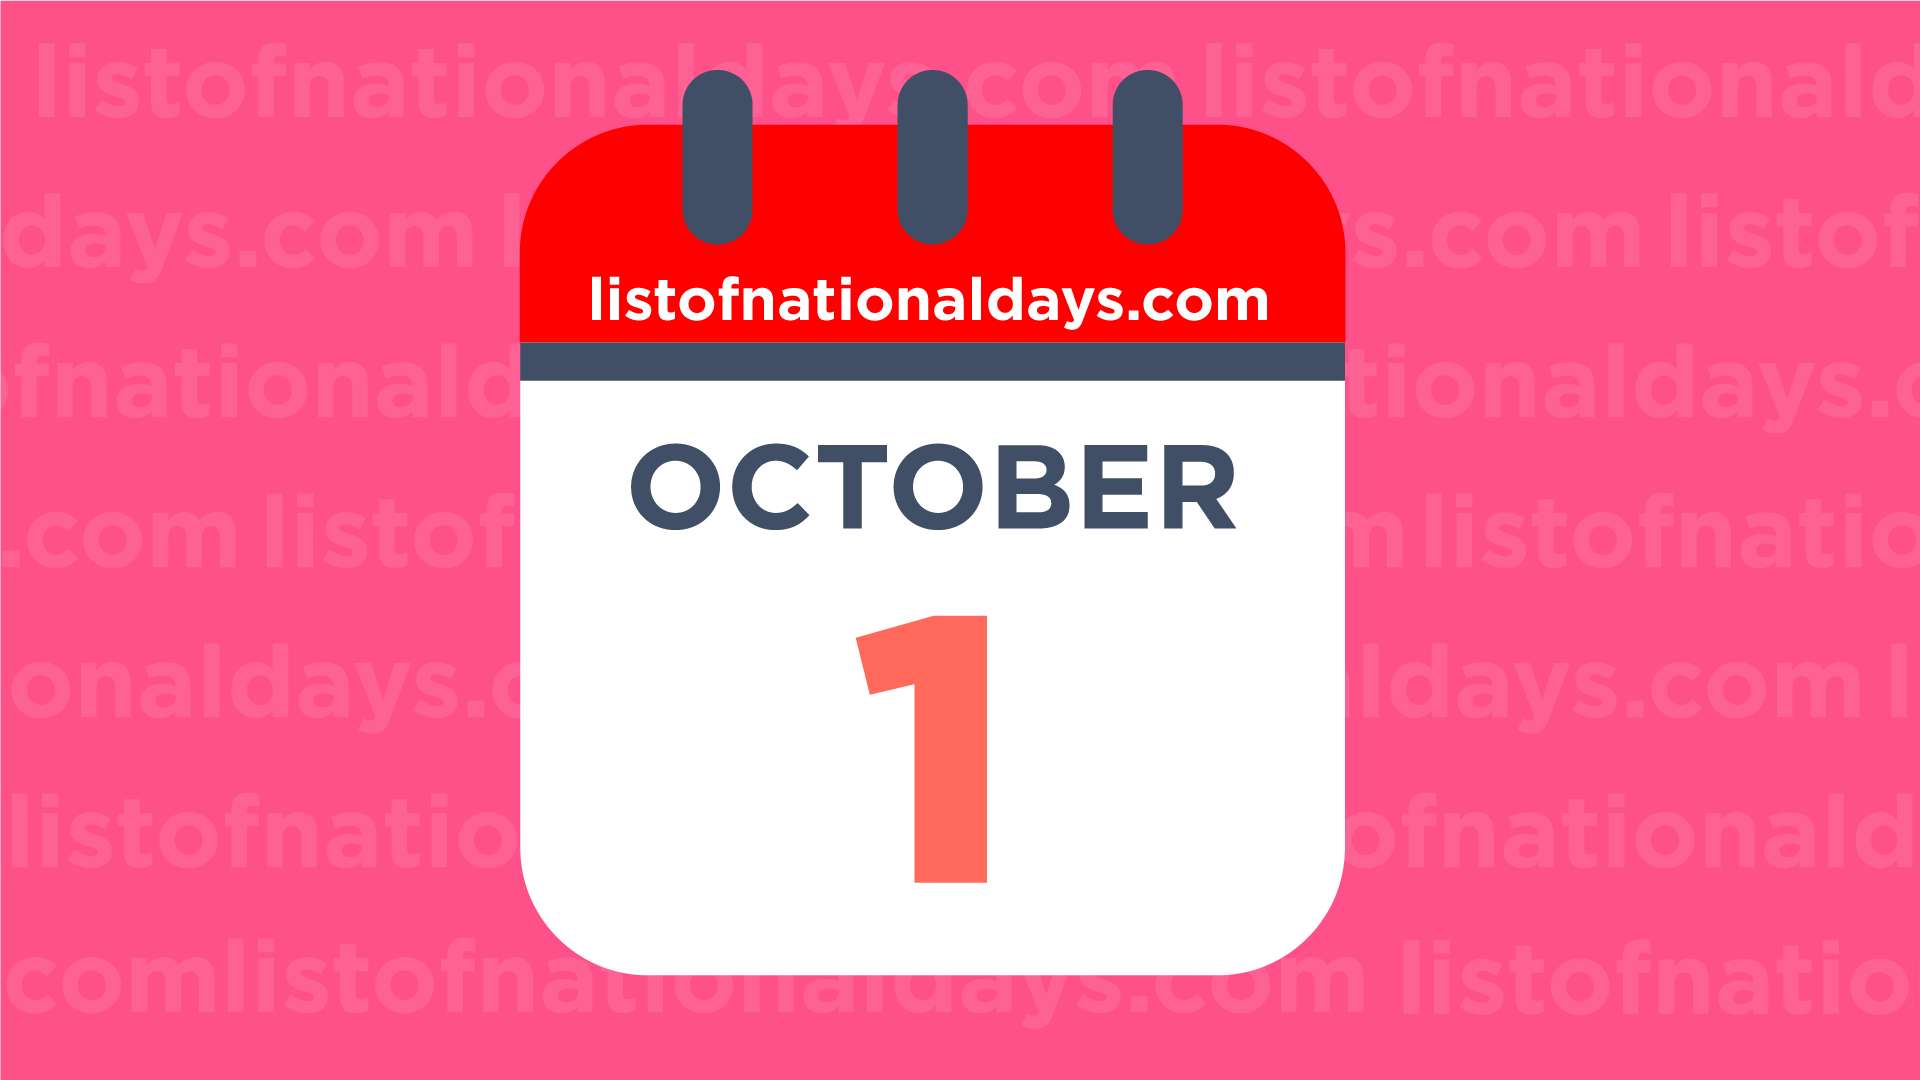 What National Day is October 1st?